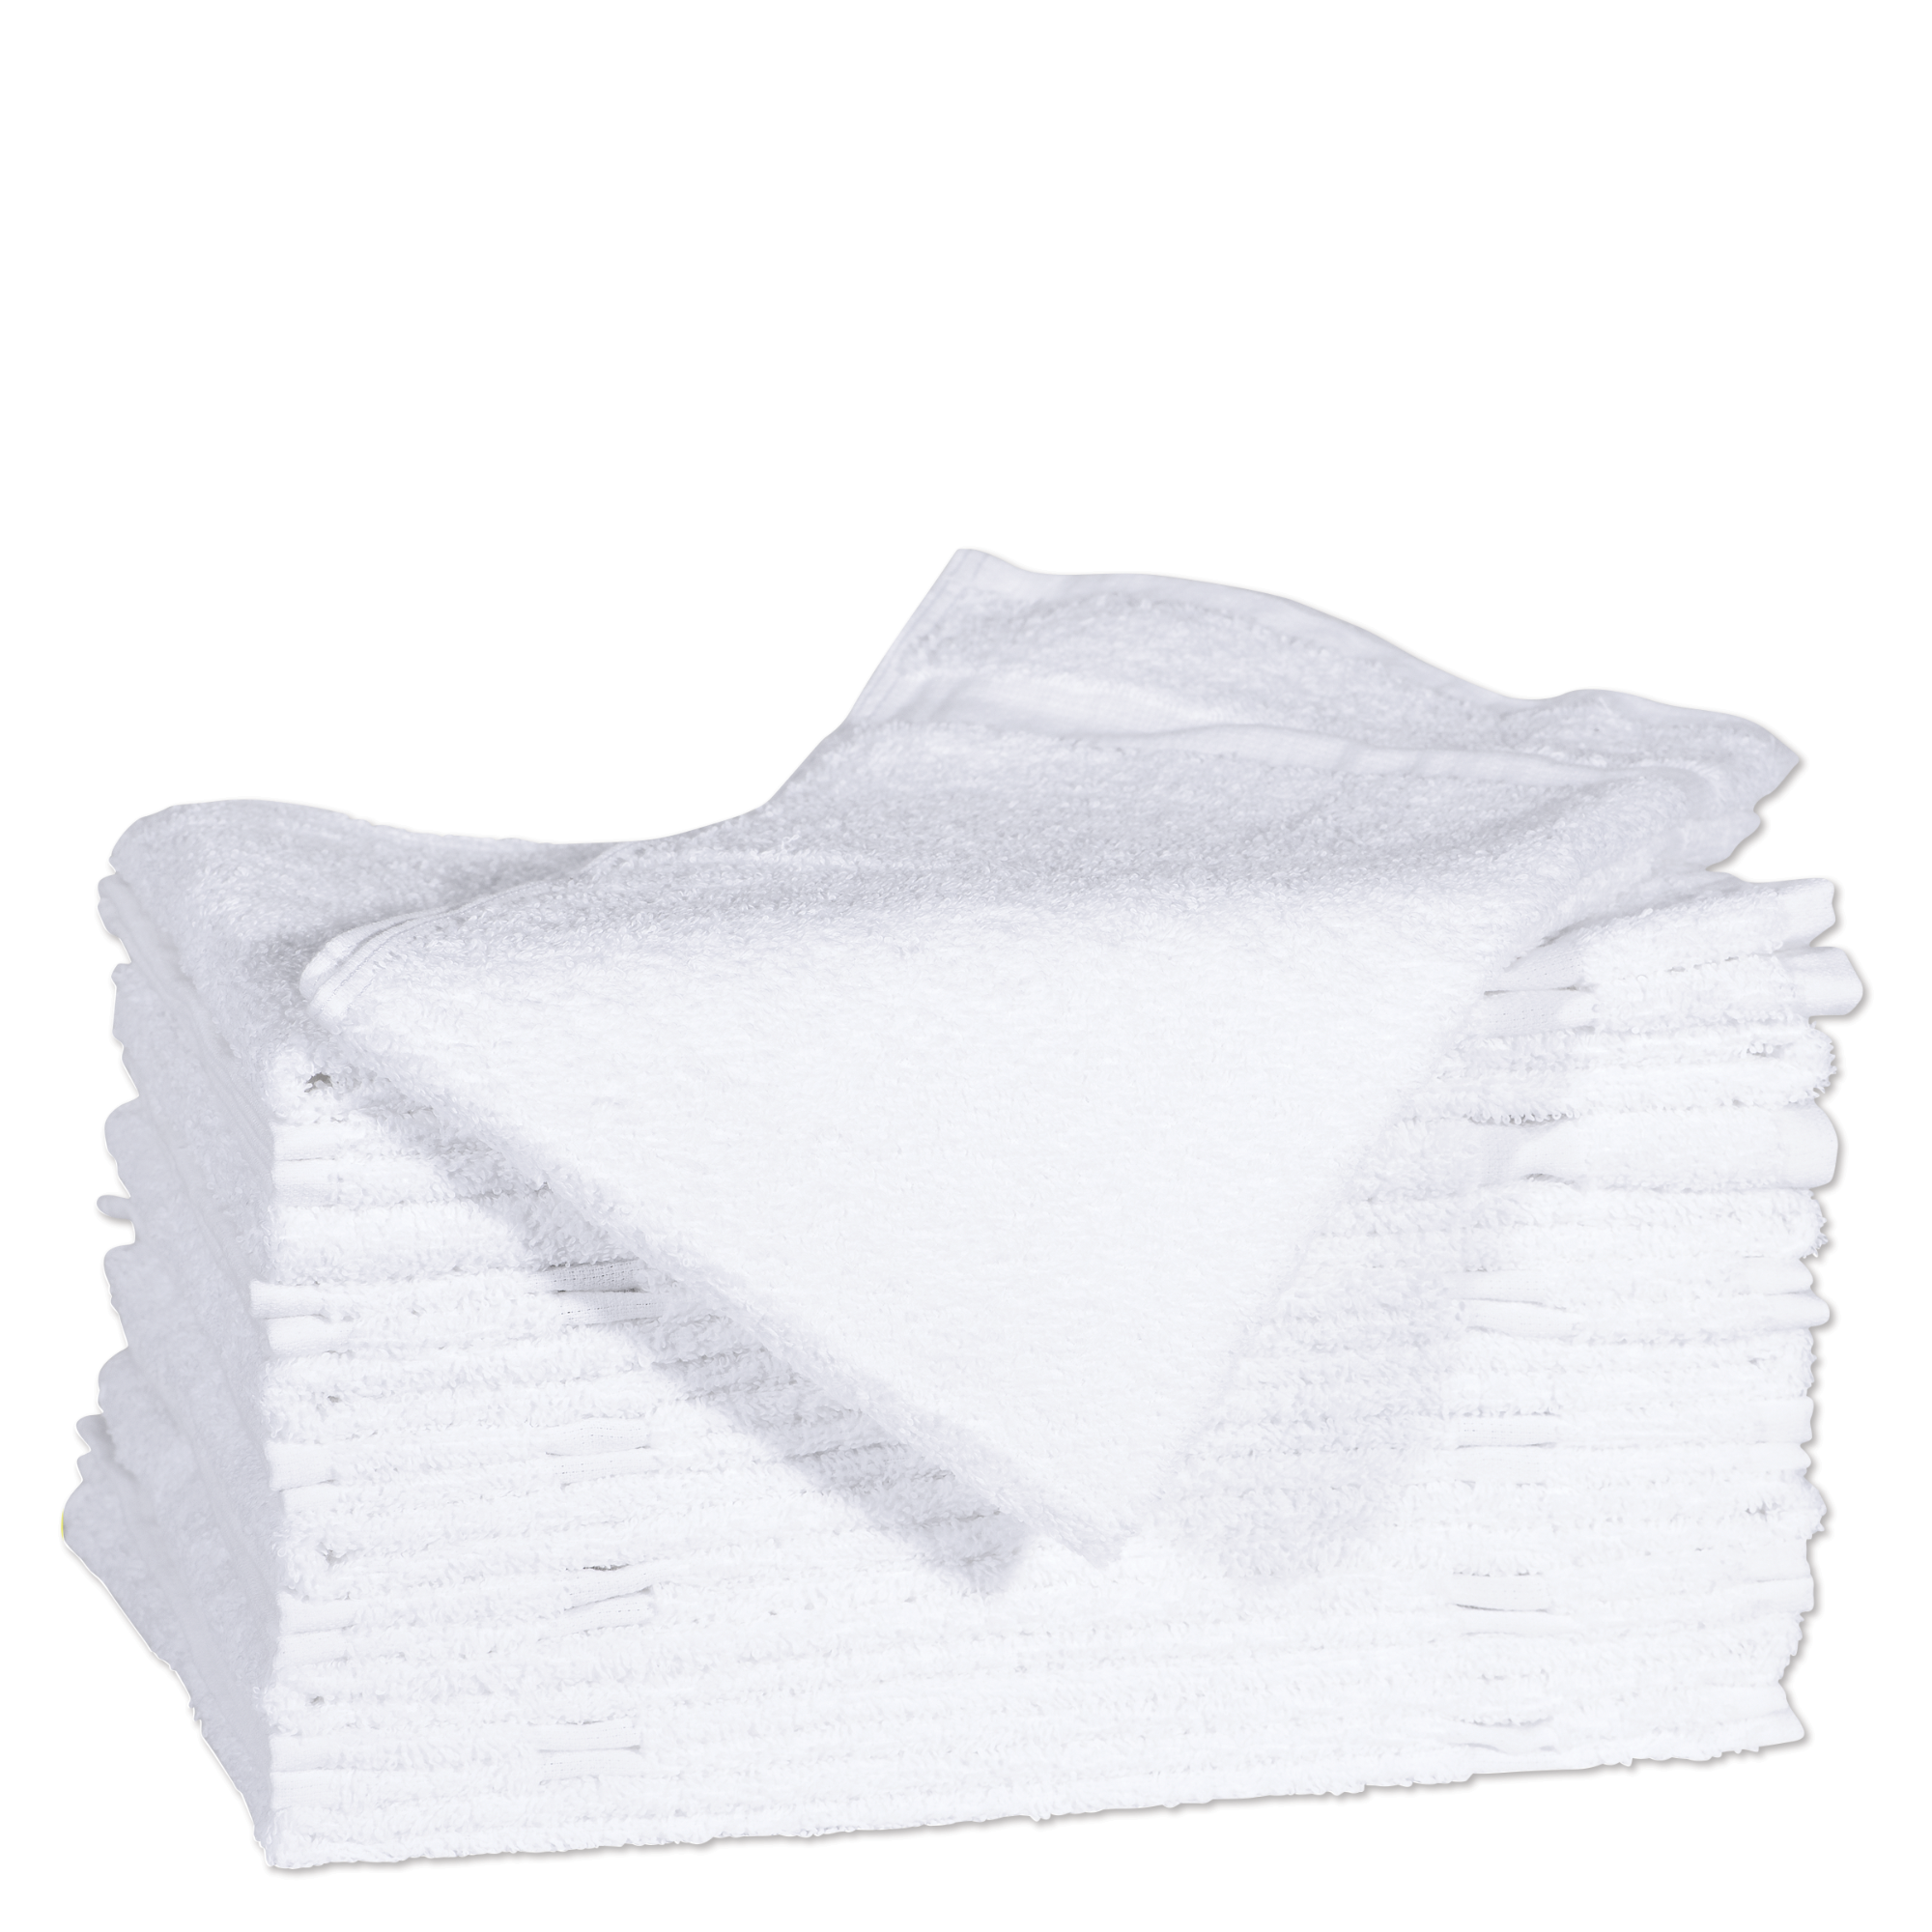 Cotton Towels, 16" x 27", 4 lbs. - White